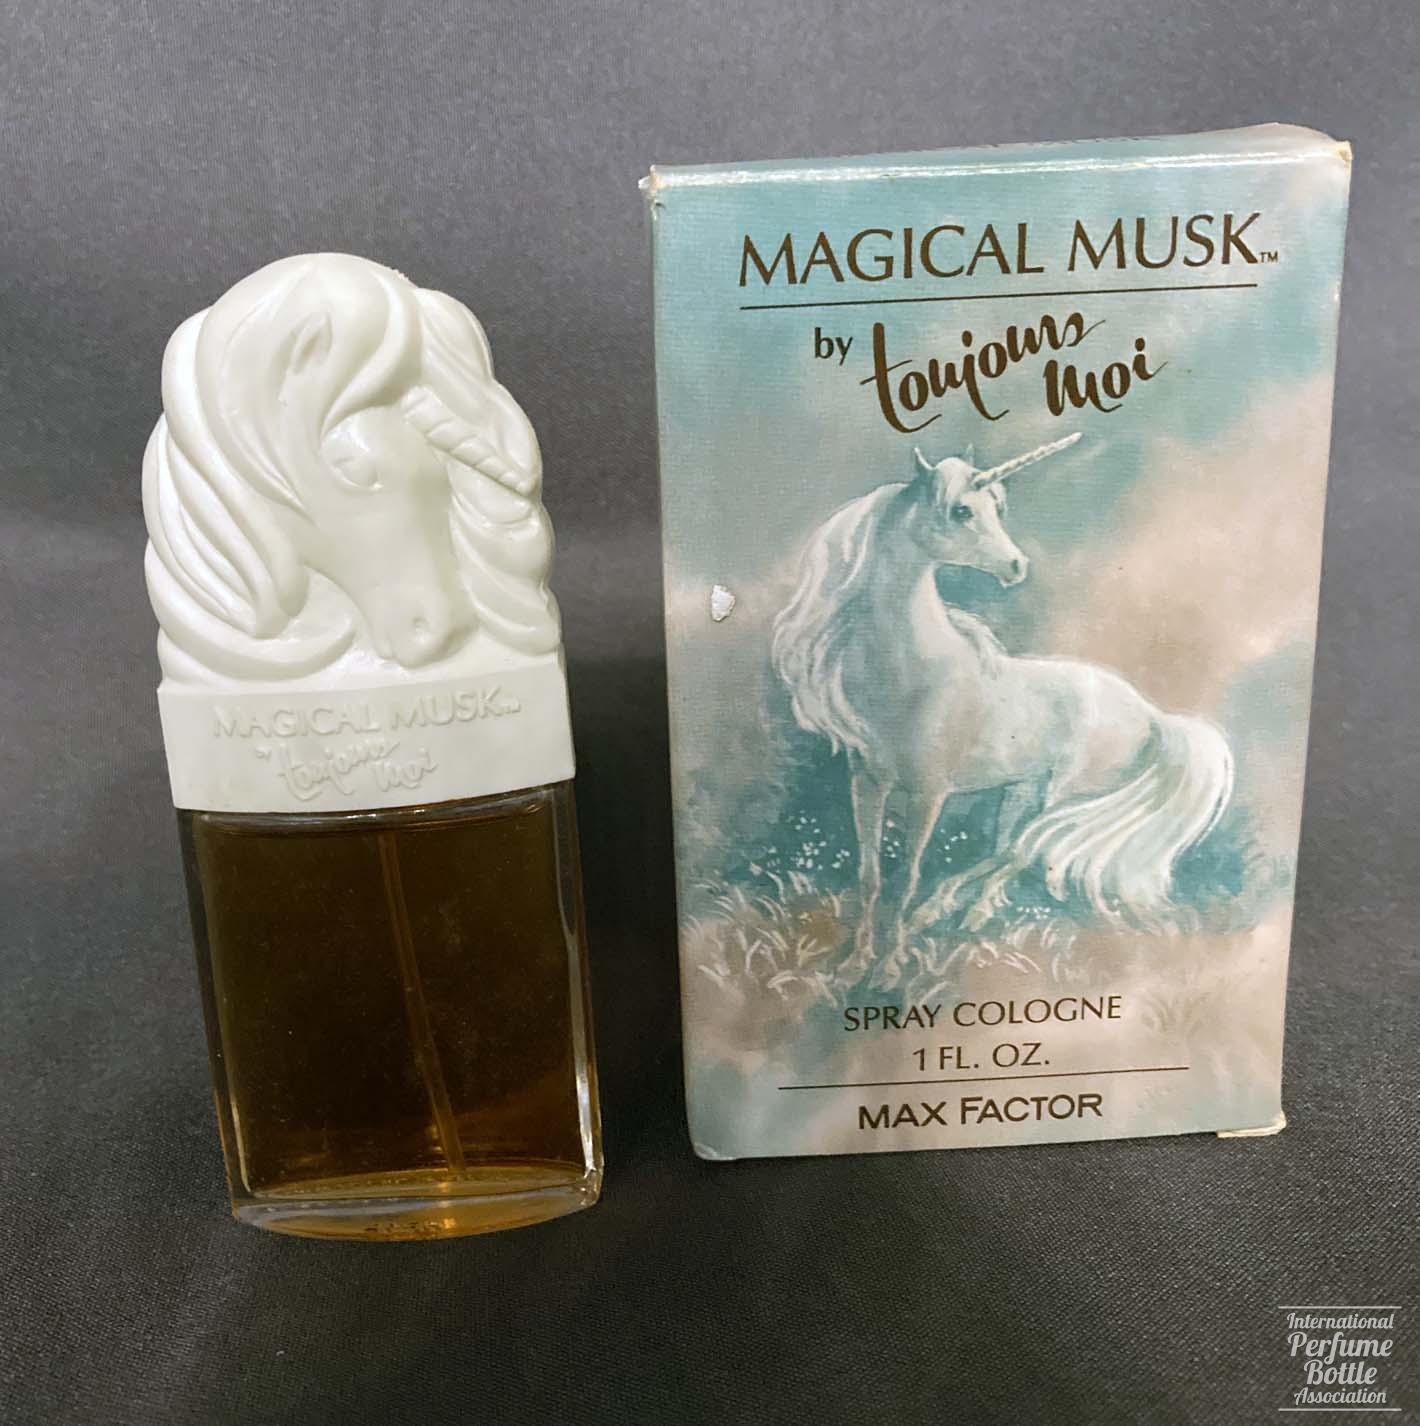 "Magical Musk by Toujours Moi" by Max Factor